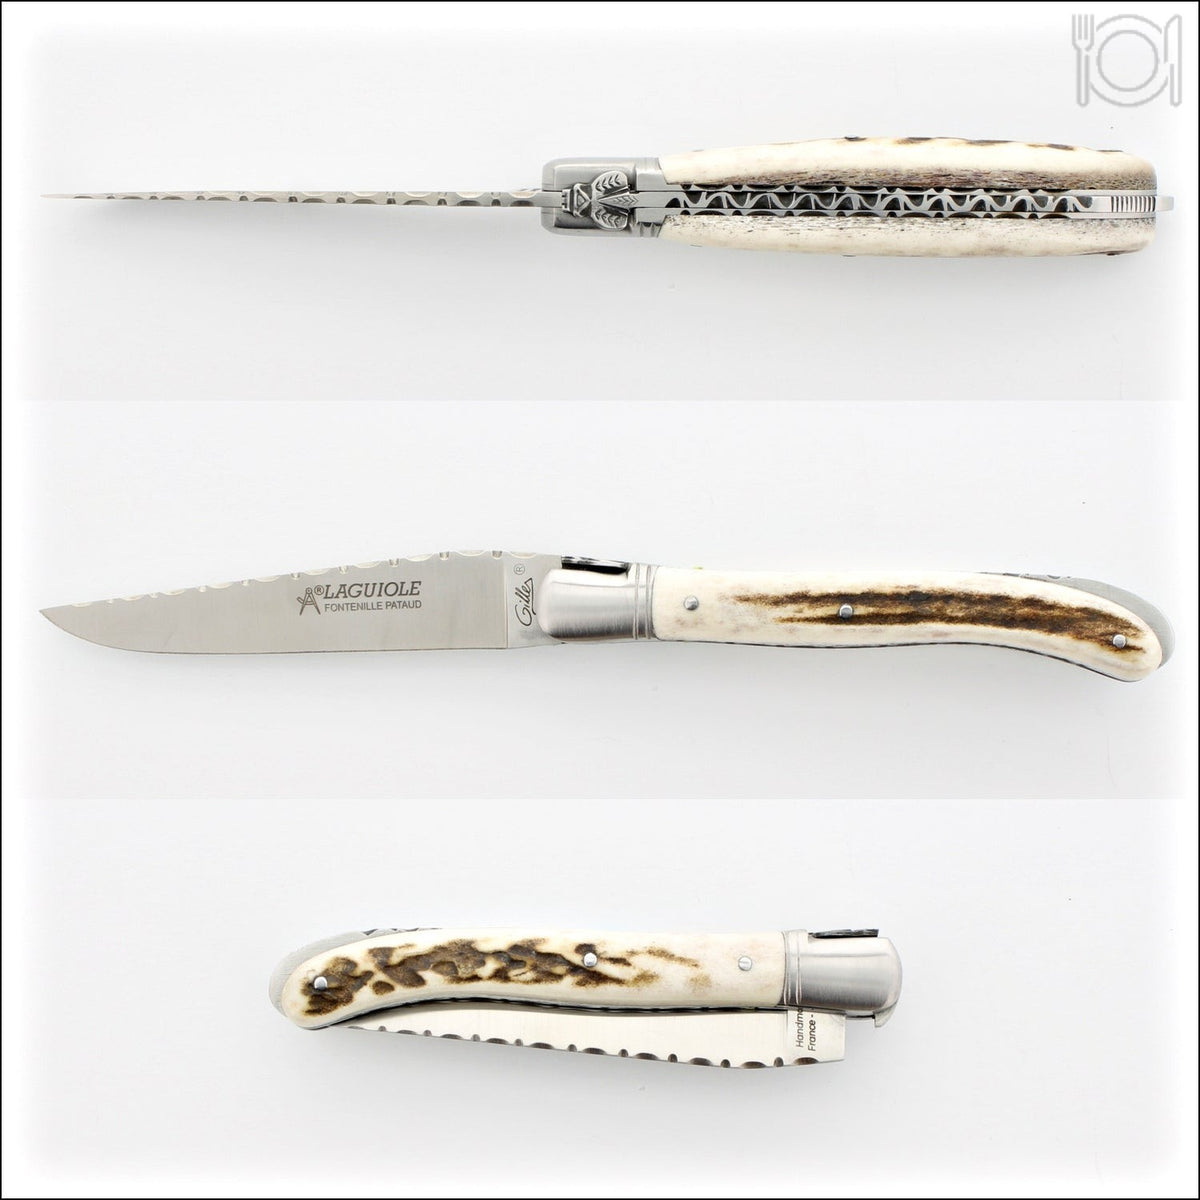 Laguiole Nature Guilloche Deer Stag Handle